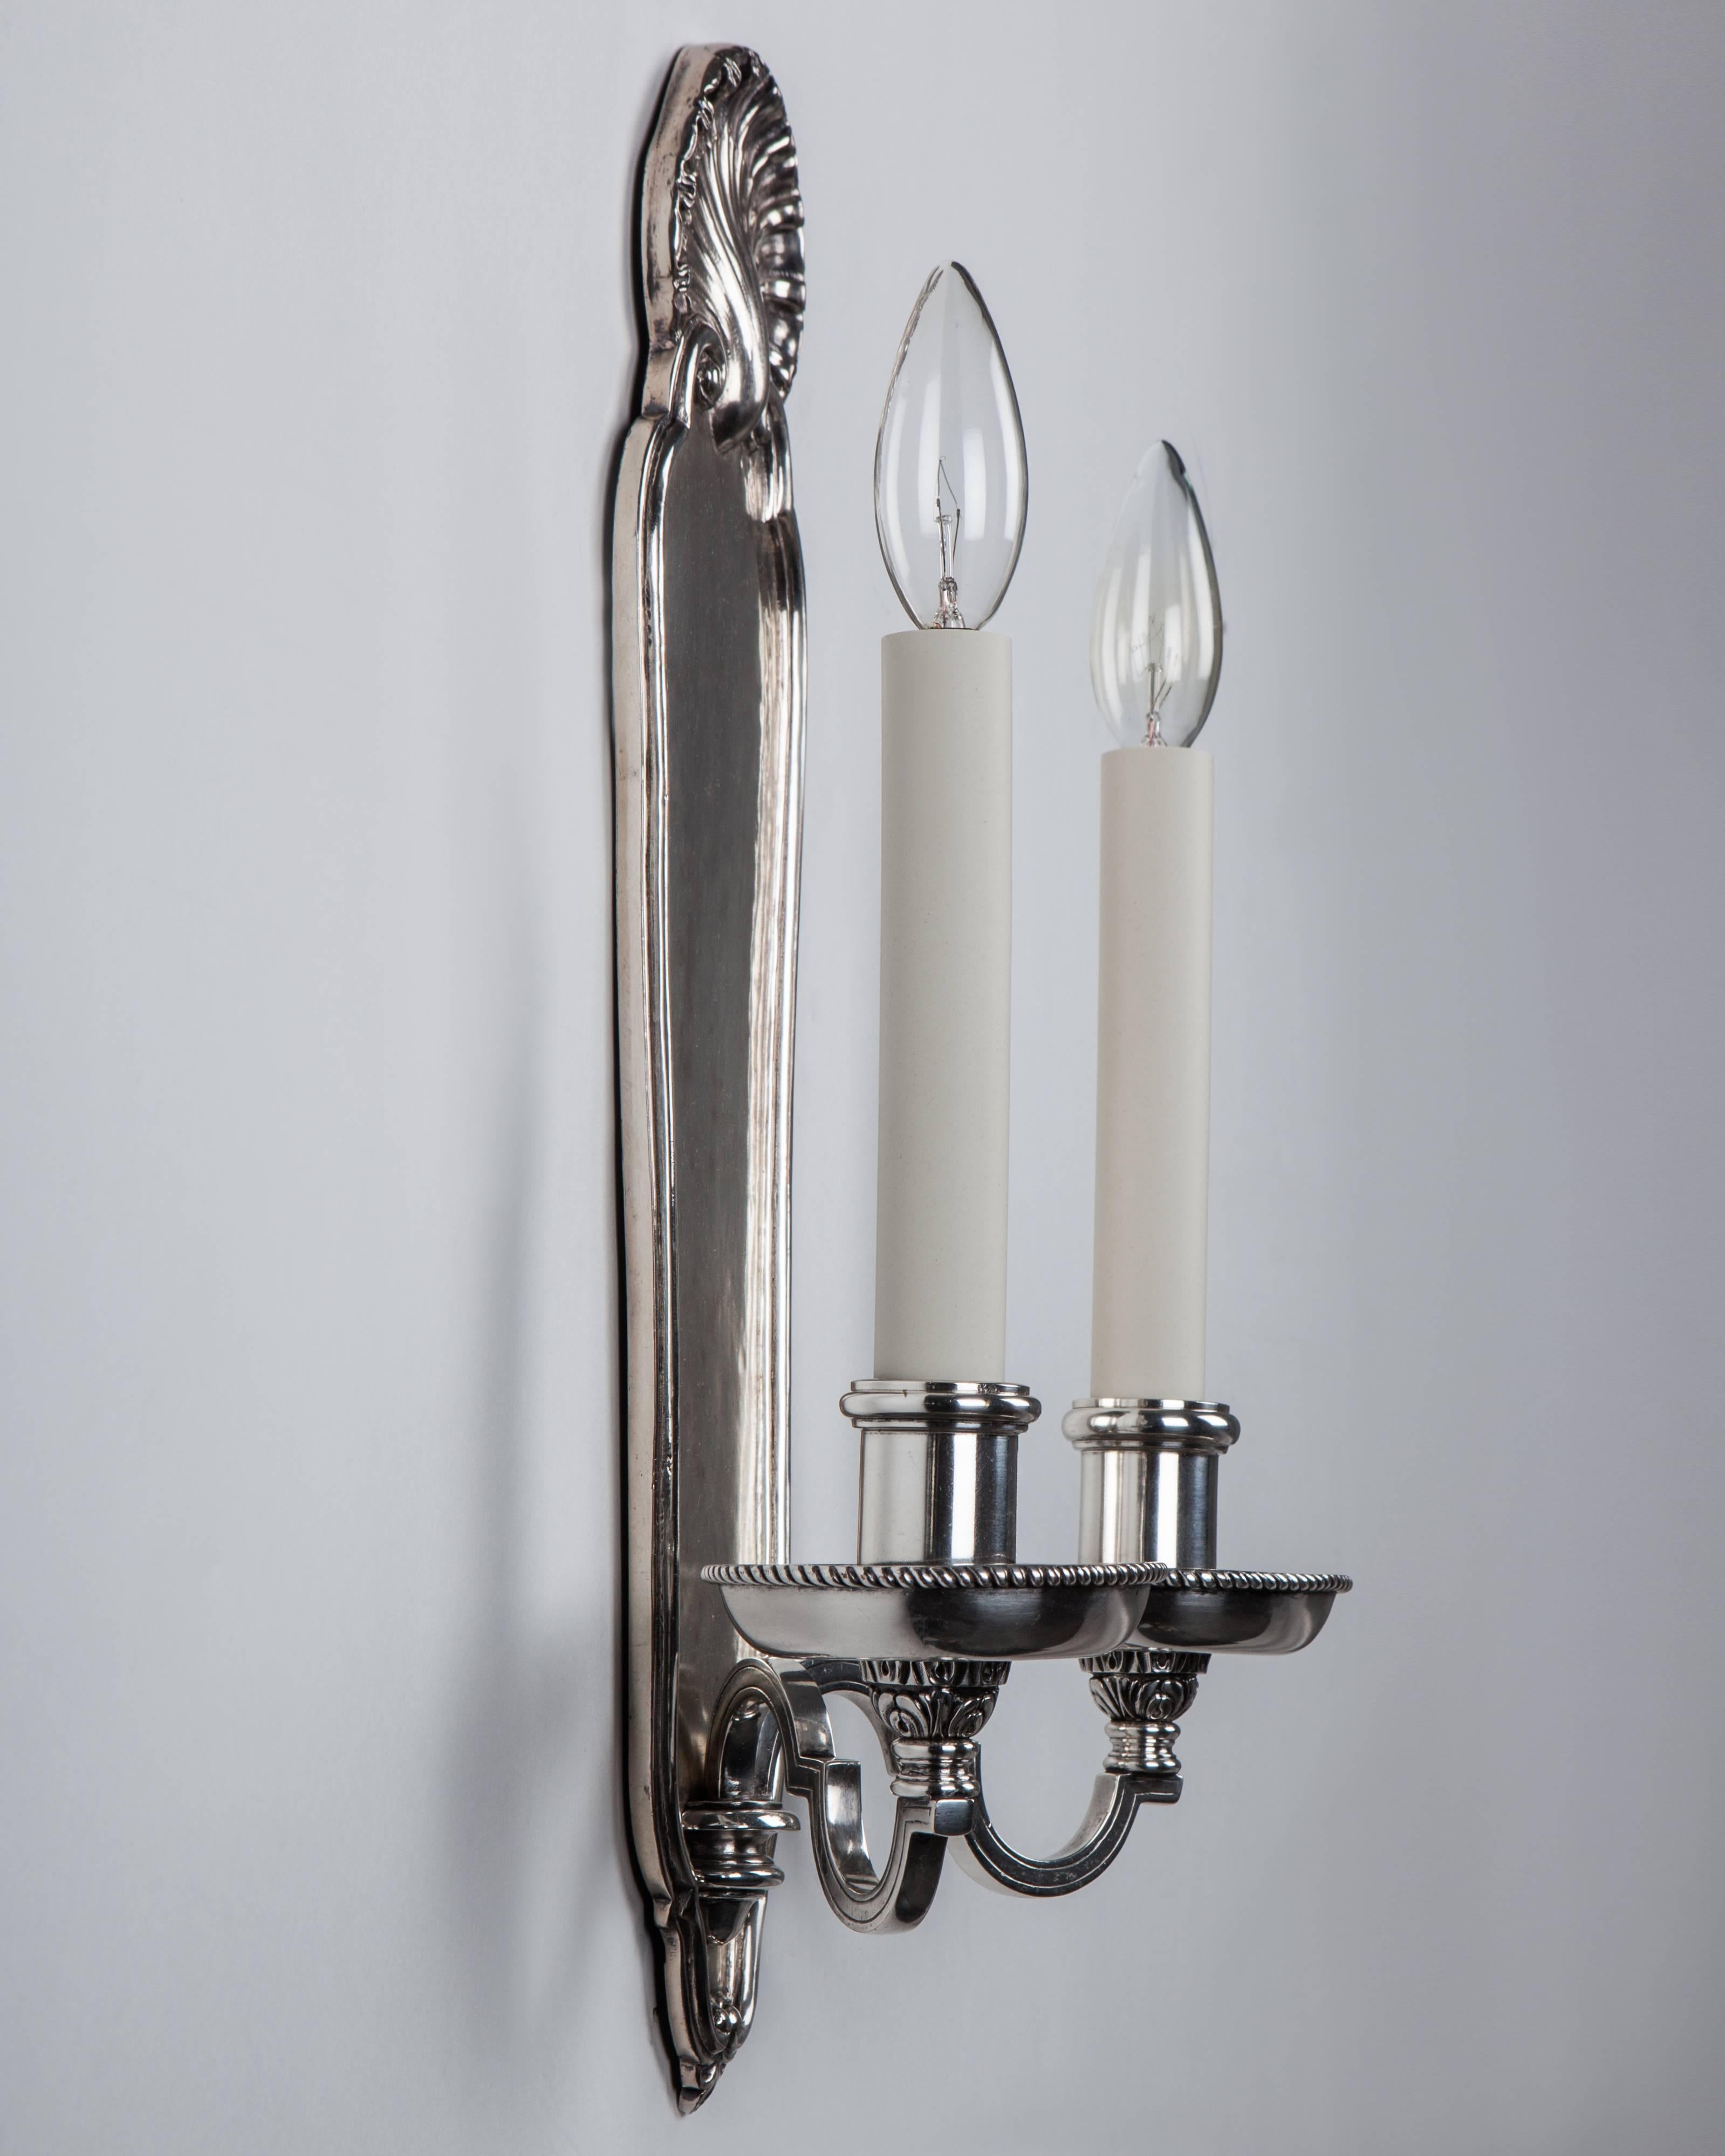 AIS2965.
A pair of antique silver plate double-light sconces with rope edge-detailed waxpans and tall shell-topped backplates. Attributed to the New York maker E. F. Caldwell Co.

Dimensions:
Overall: 18